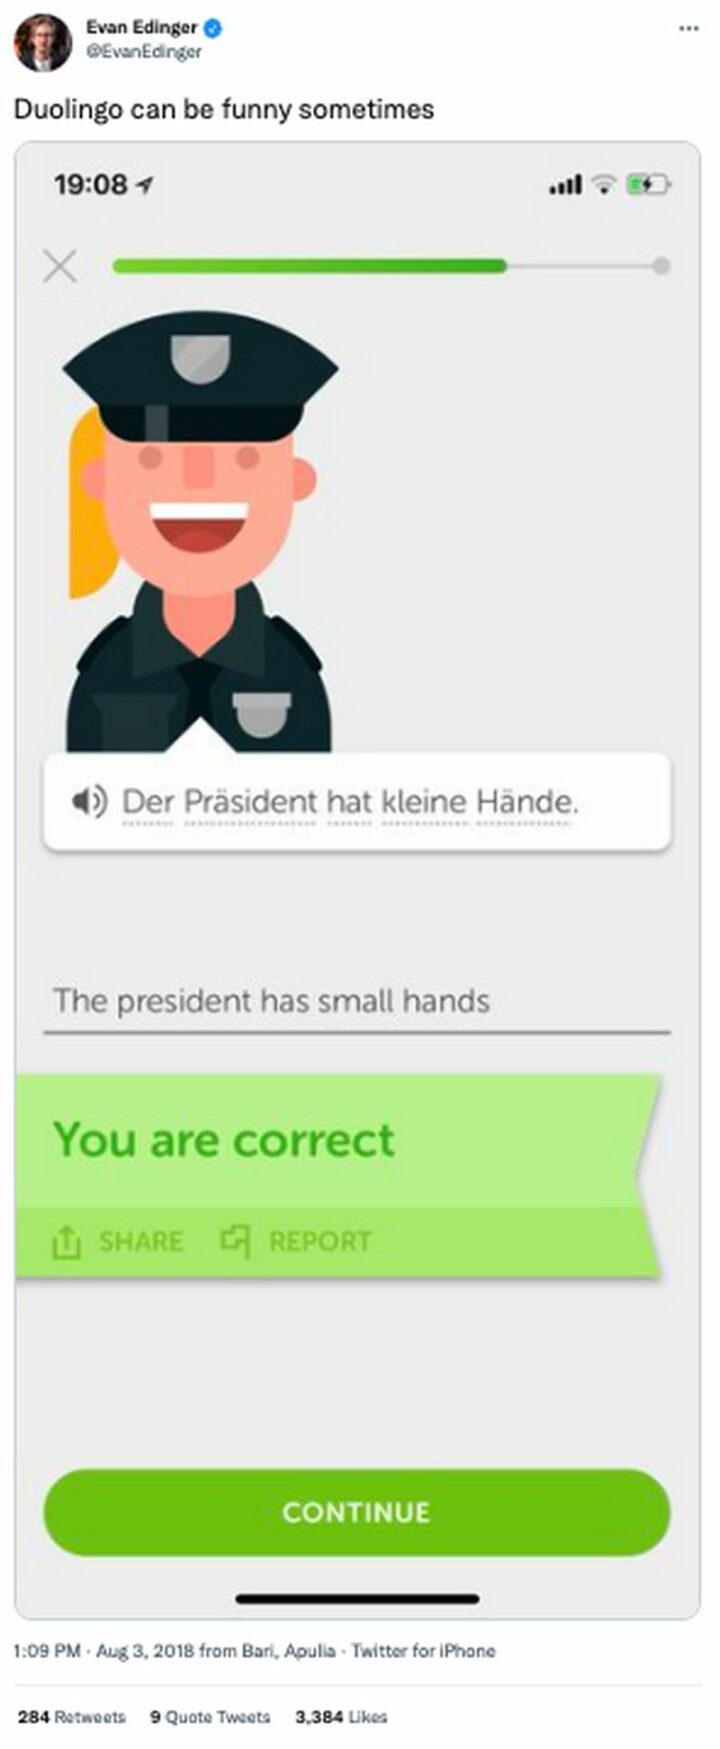 "Duolingo can be funny sometimes. The president has small hands. You are correct.